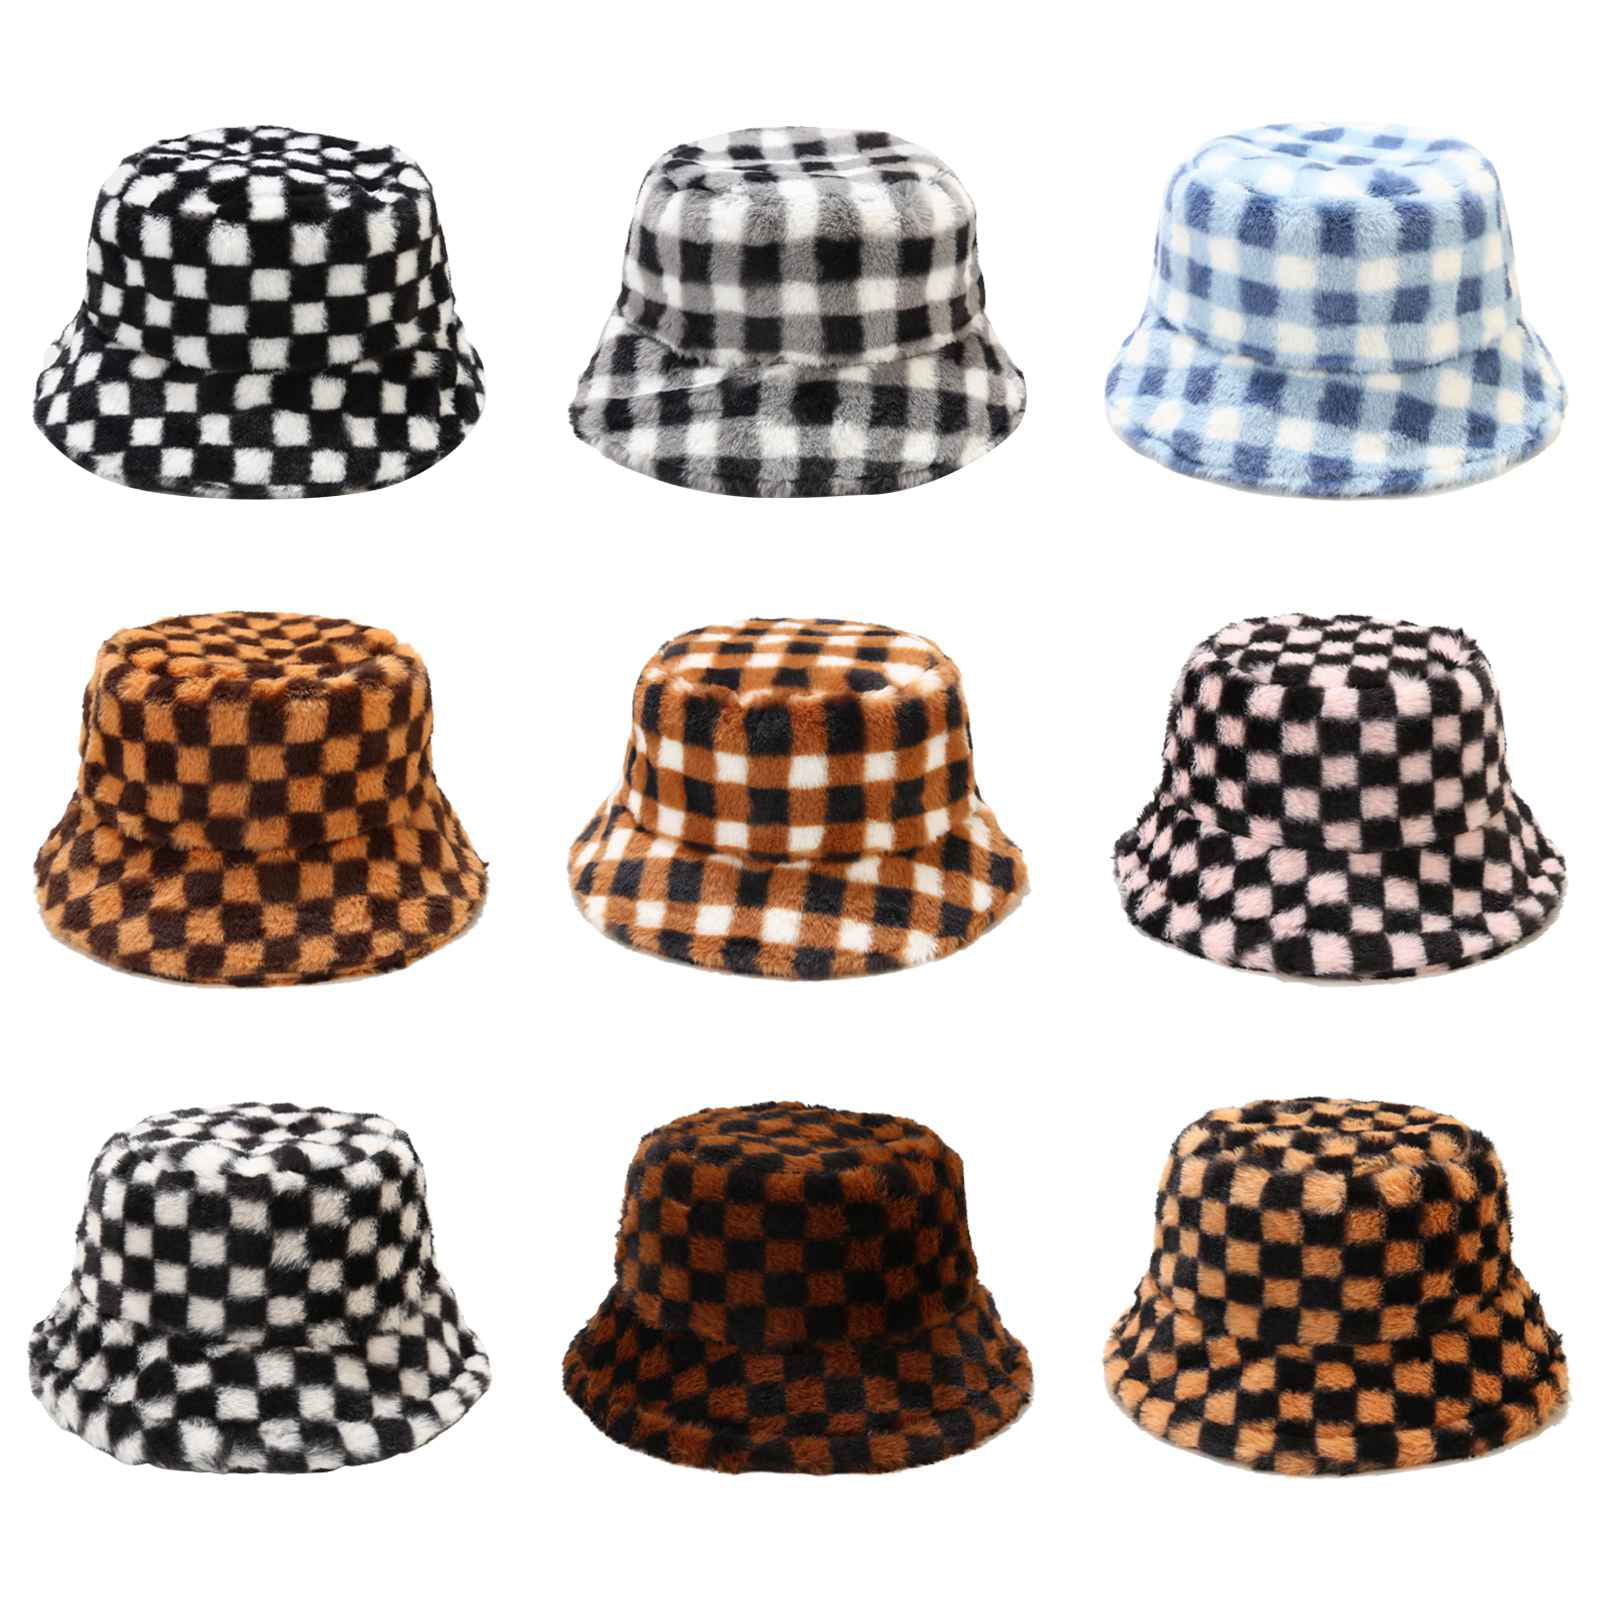 Bucket Hat Fishing Hats Sun Hat Bunny Print Plaid Packable Adjustable for Women Men Unisex Beach Camping Sports Outdoor Travel Spring Summer Autumn